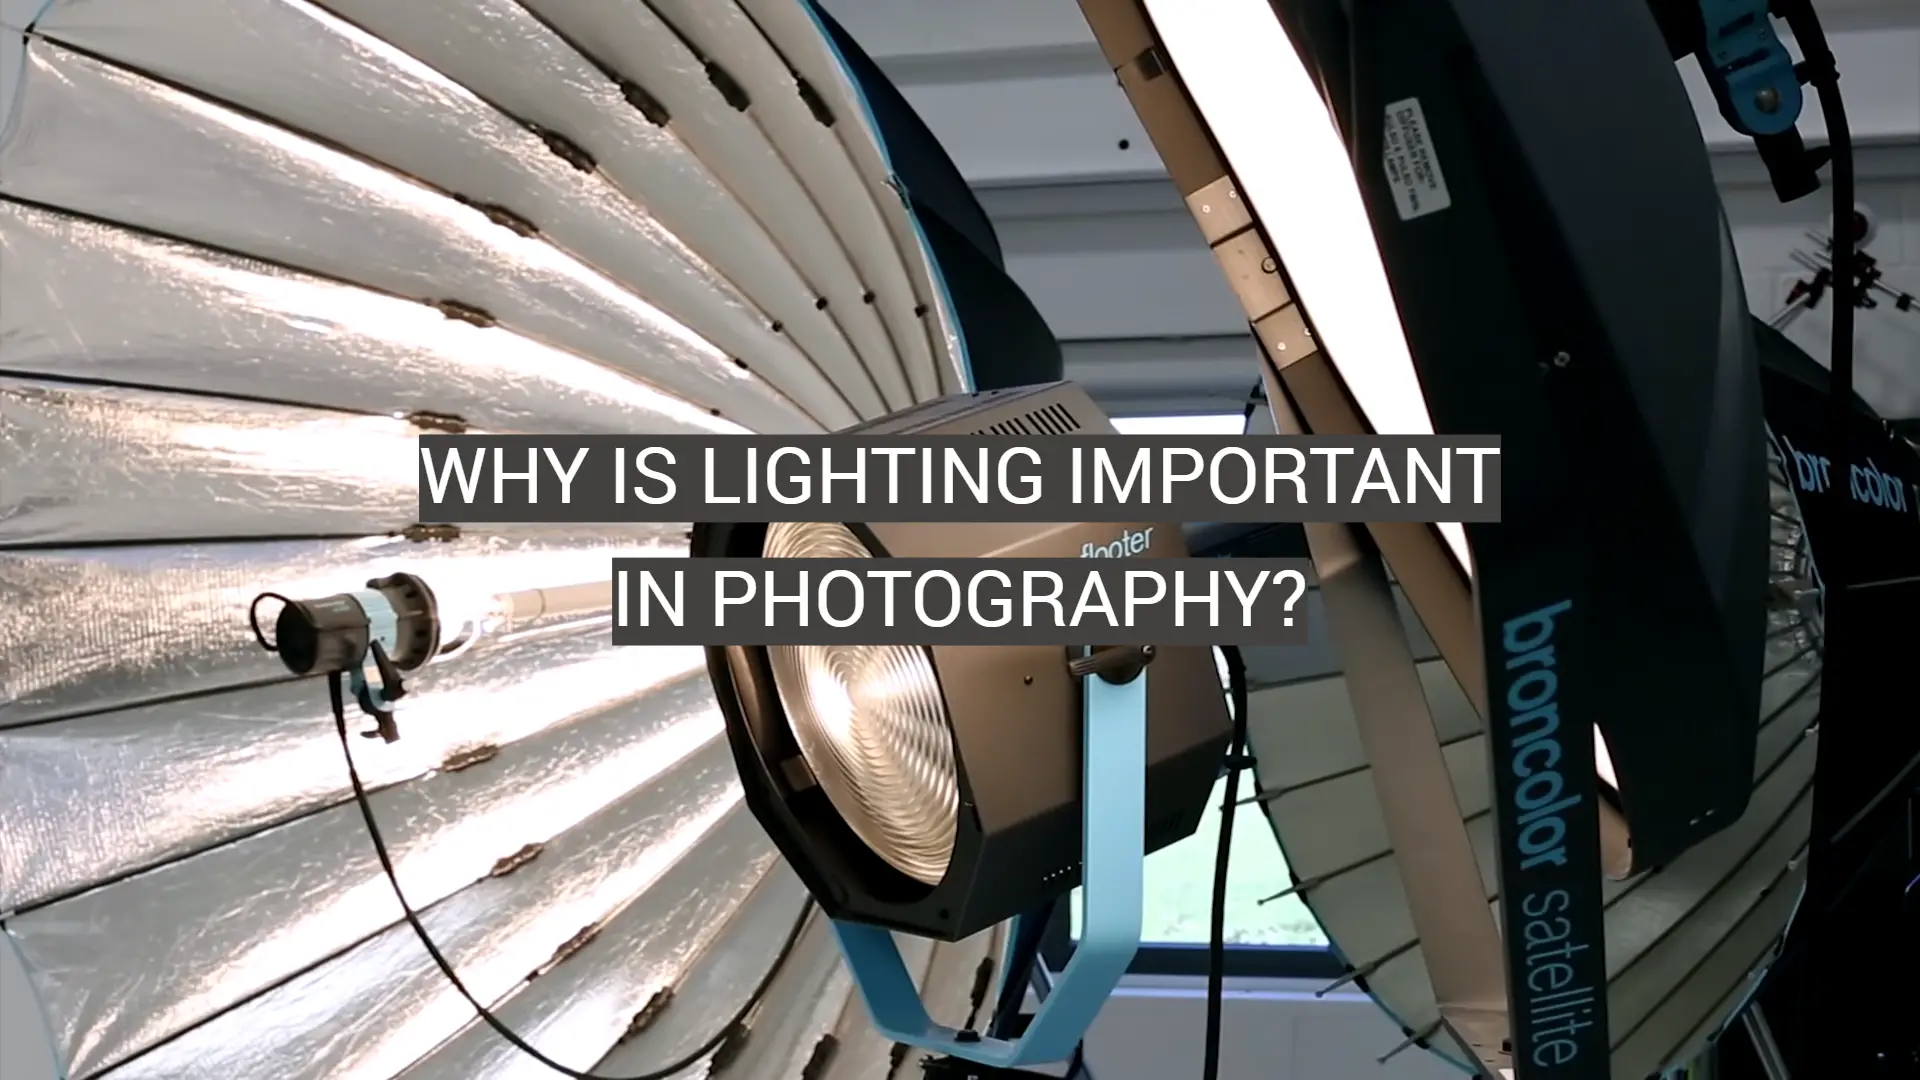 Why Is Lighting Important in Photography?